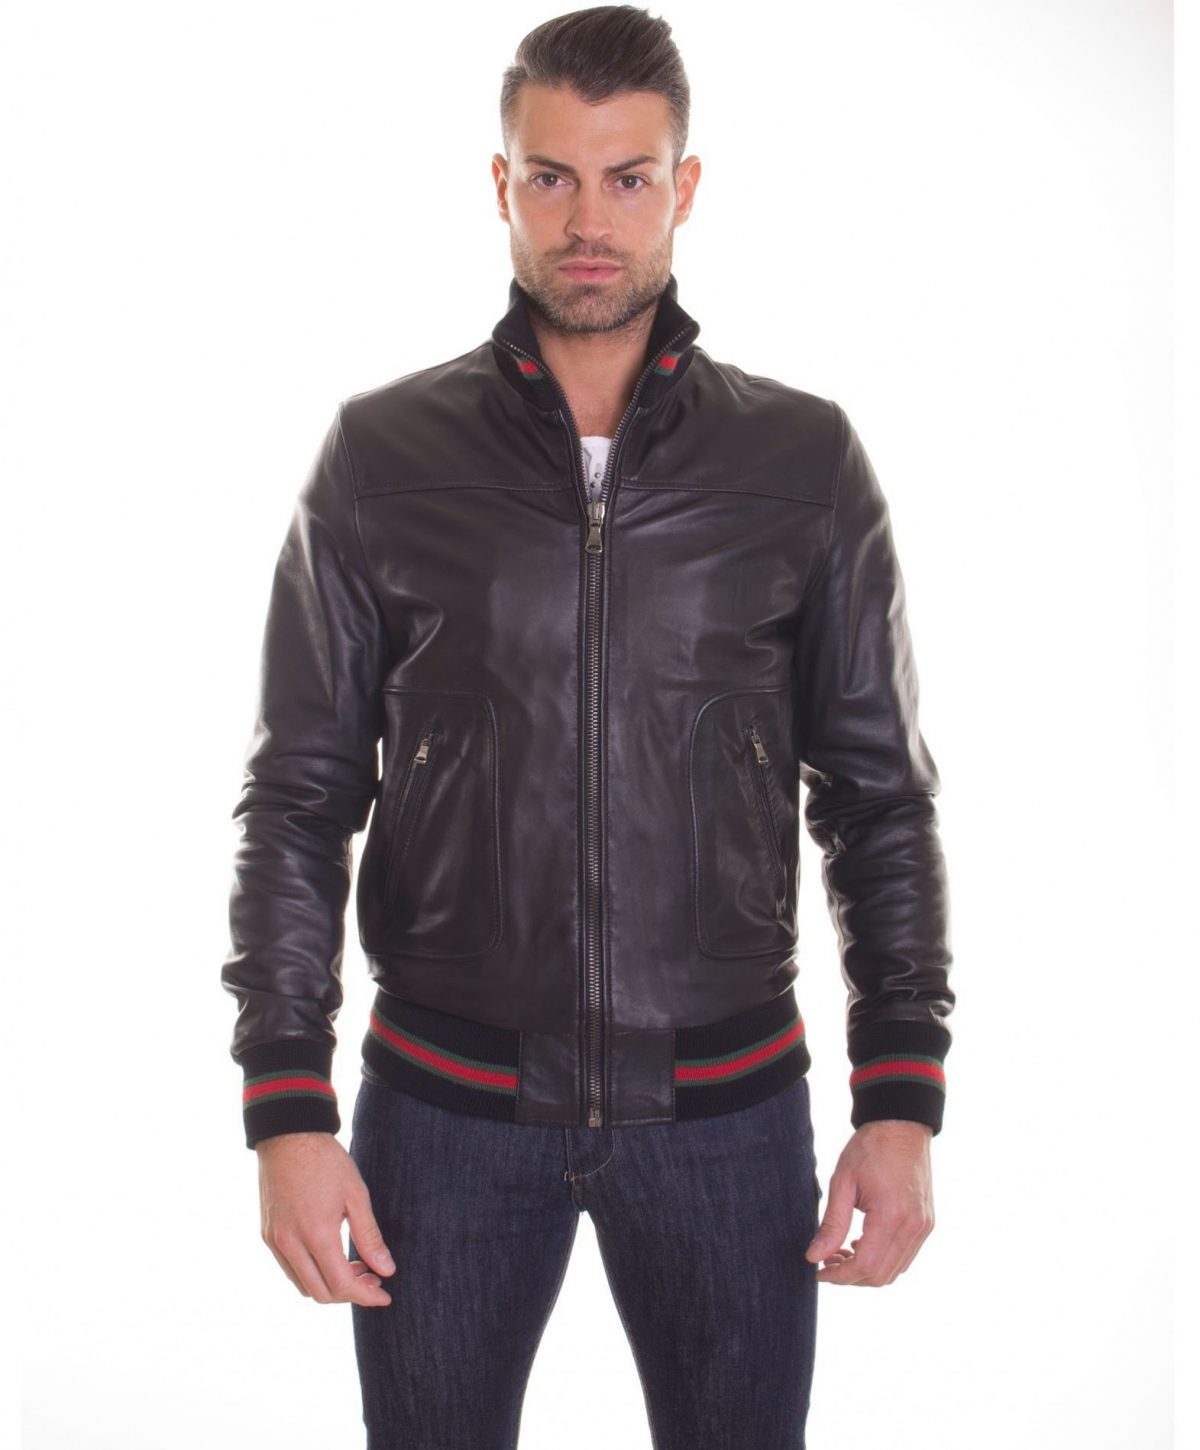 men-s-leather-jacket-genuine-soft-leather-style-bomber-bicolor-wool-cuffs-and-bottom-central-zip-black-color-mod-alex (1)